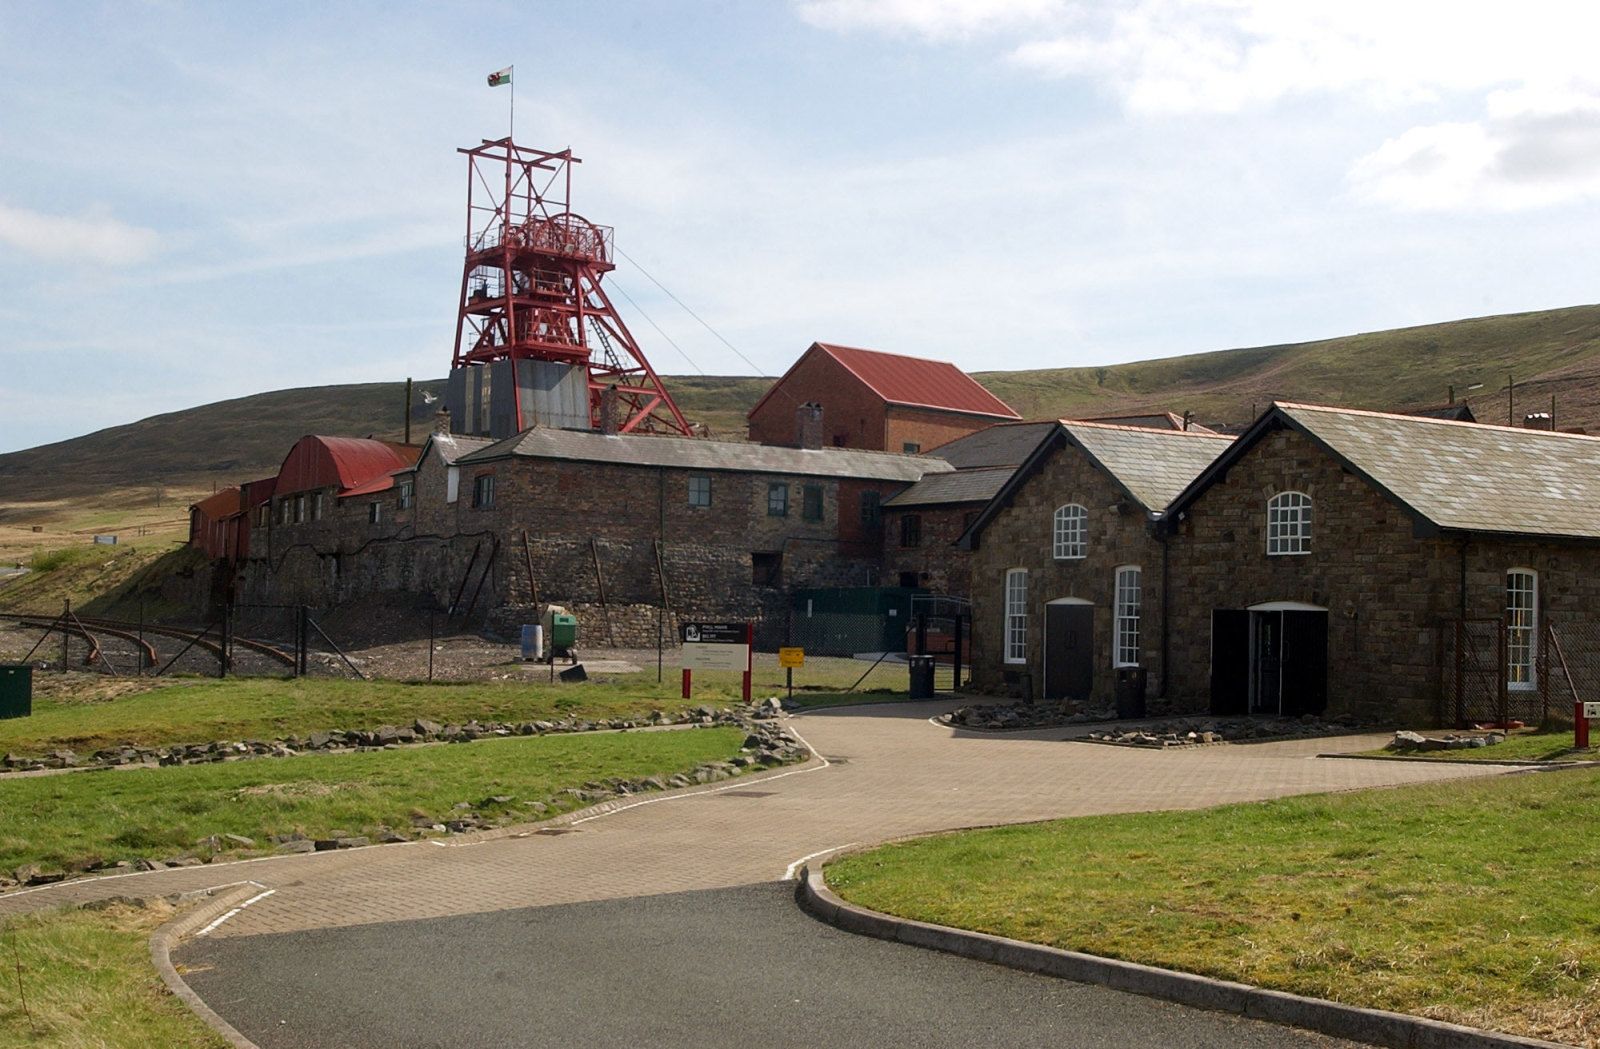 Big Pit is a real coal mine and one of Britain’s leading mining museums